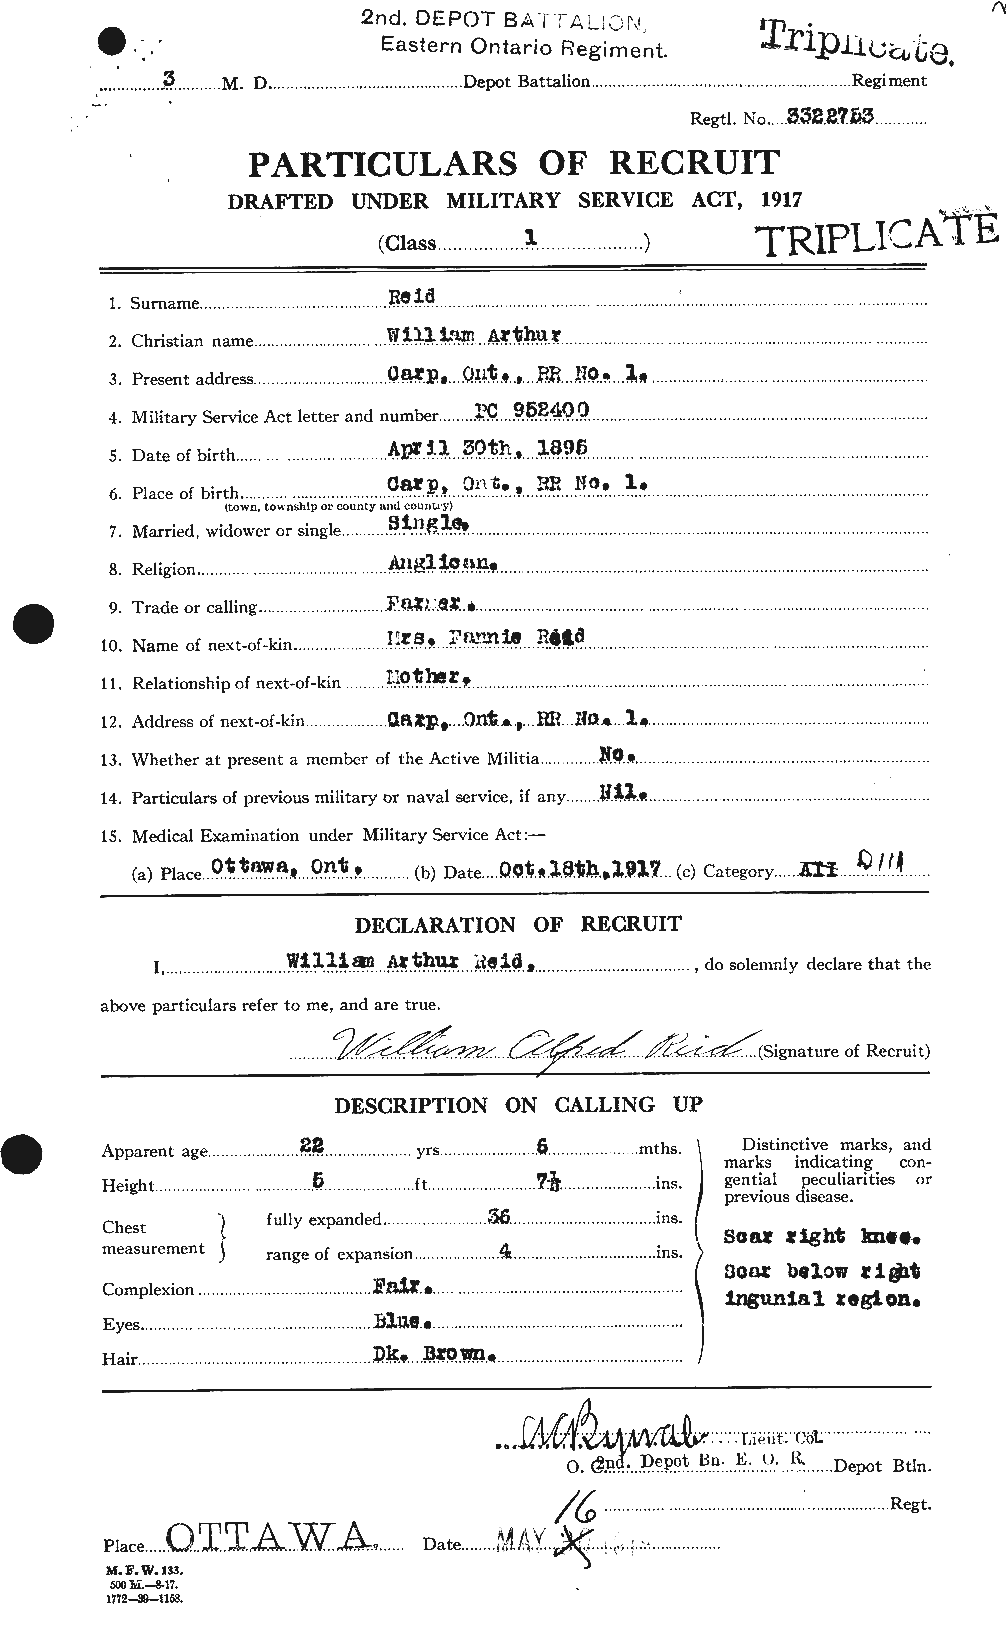 Personnel Records of the First World War - CEF 596962a